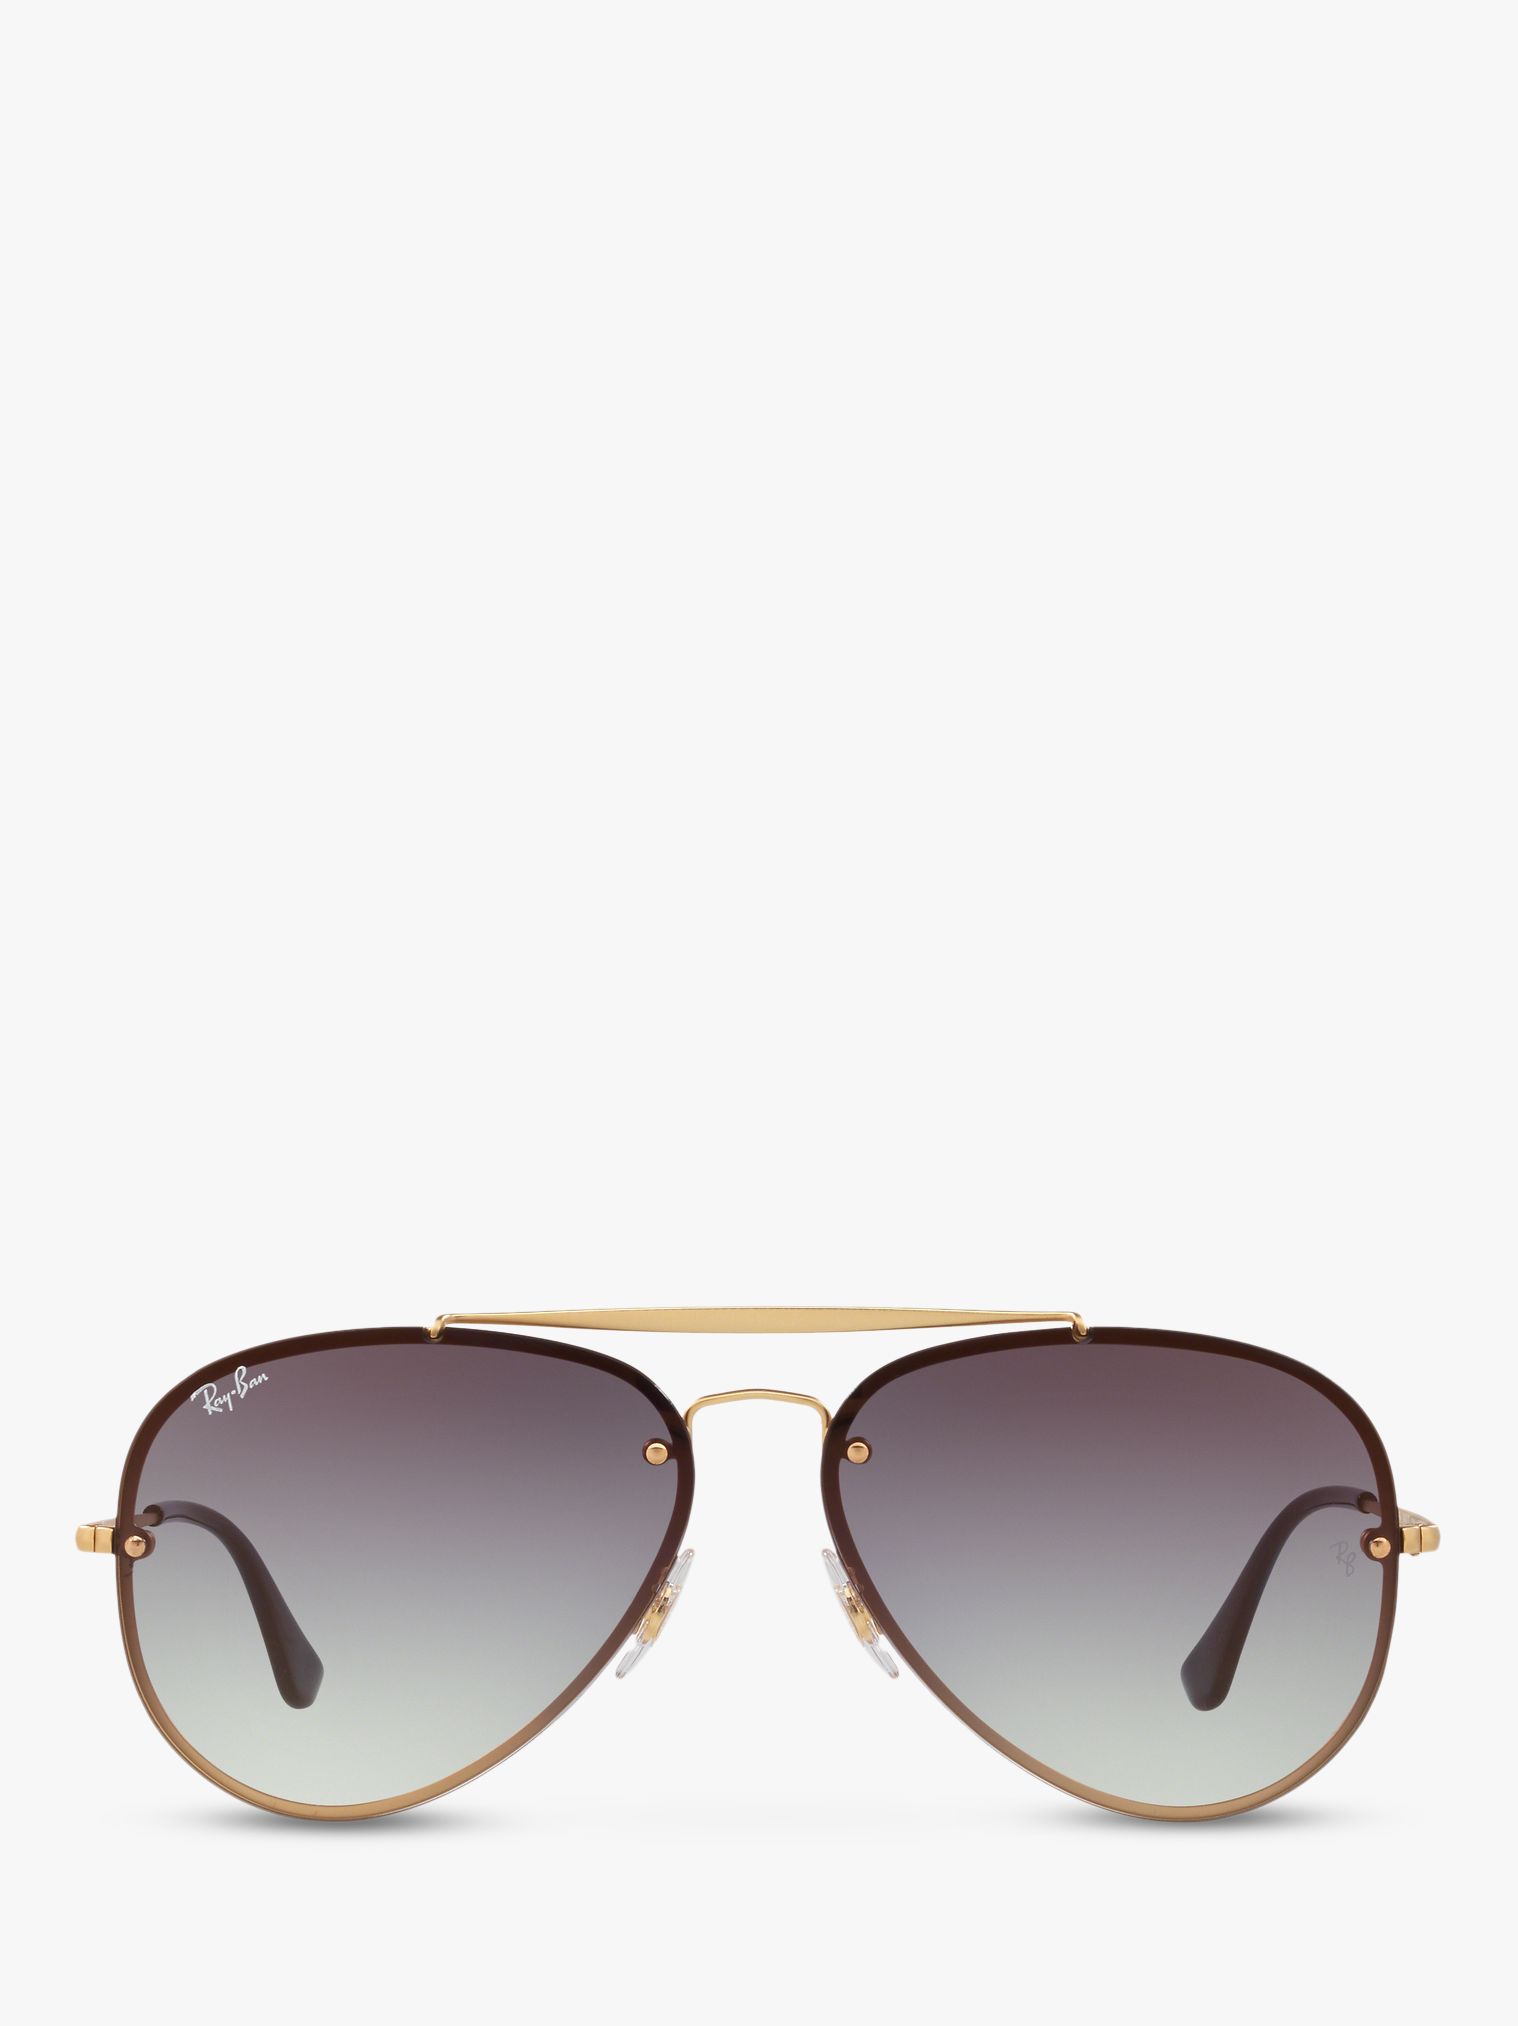 Ray Ban Rb3584n Unisex Blaze Aviator Sunglasses Gold Blue Gradient At John Lewis And Partners